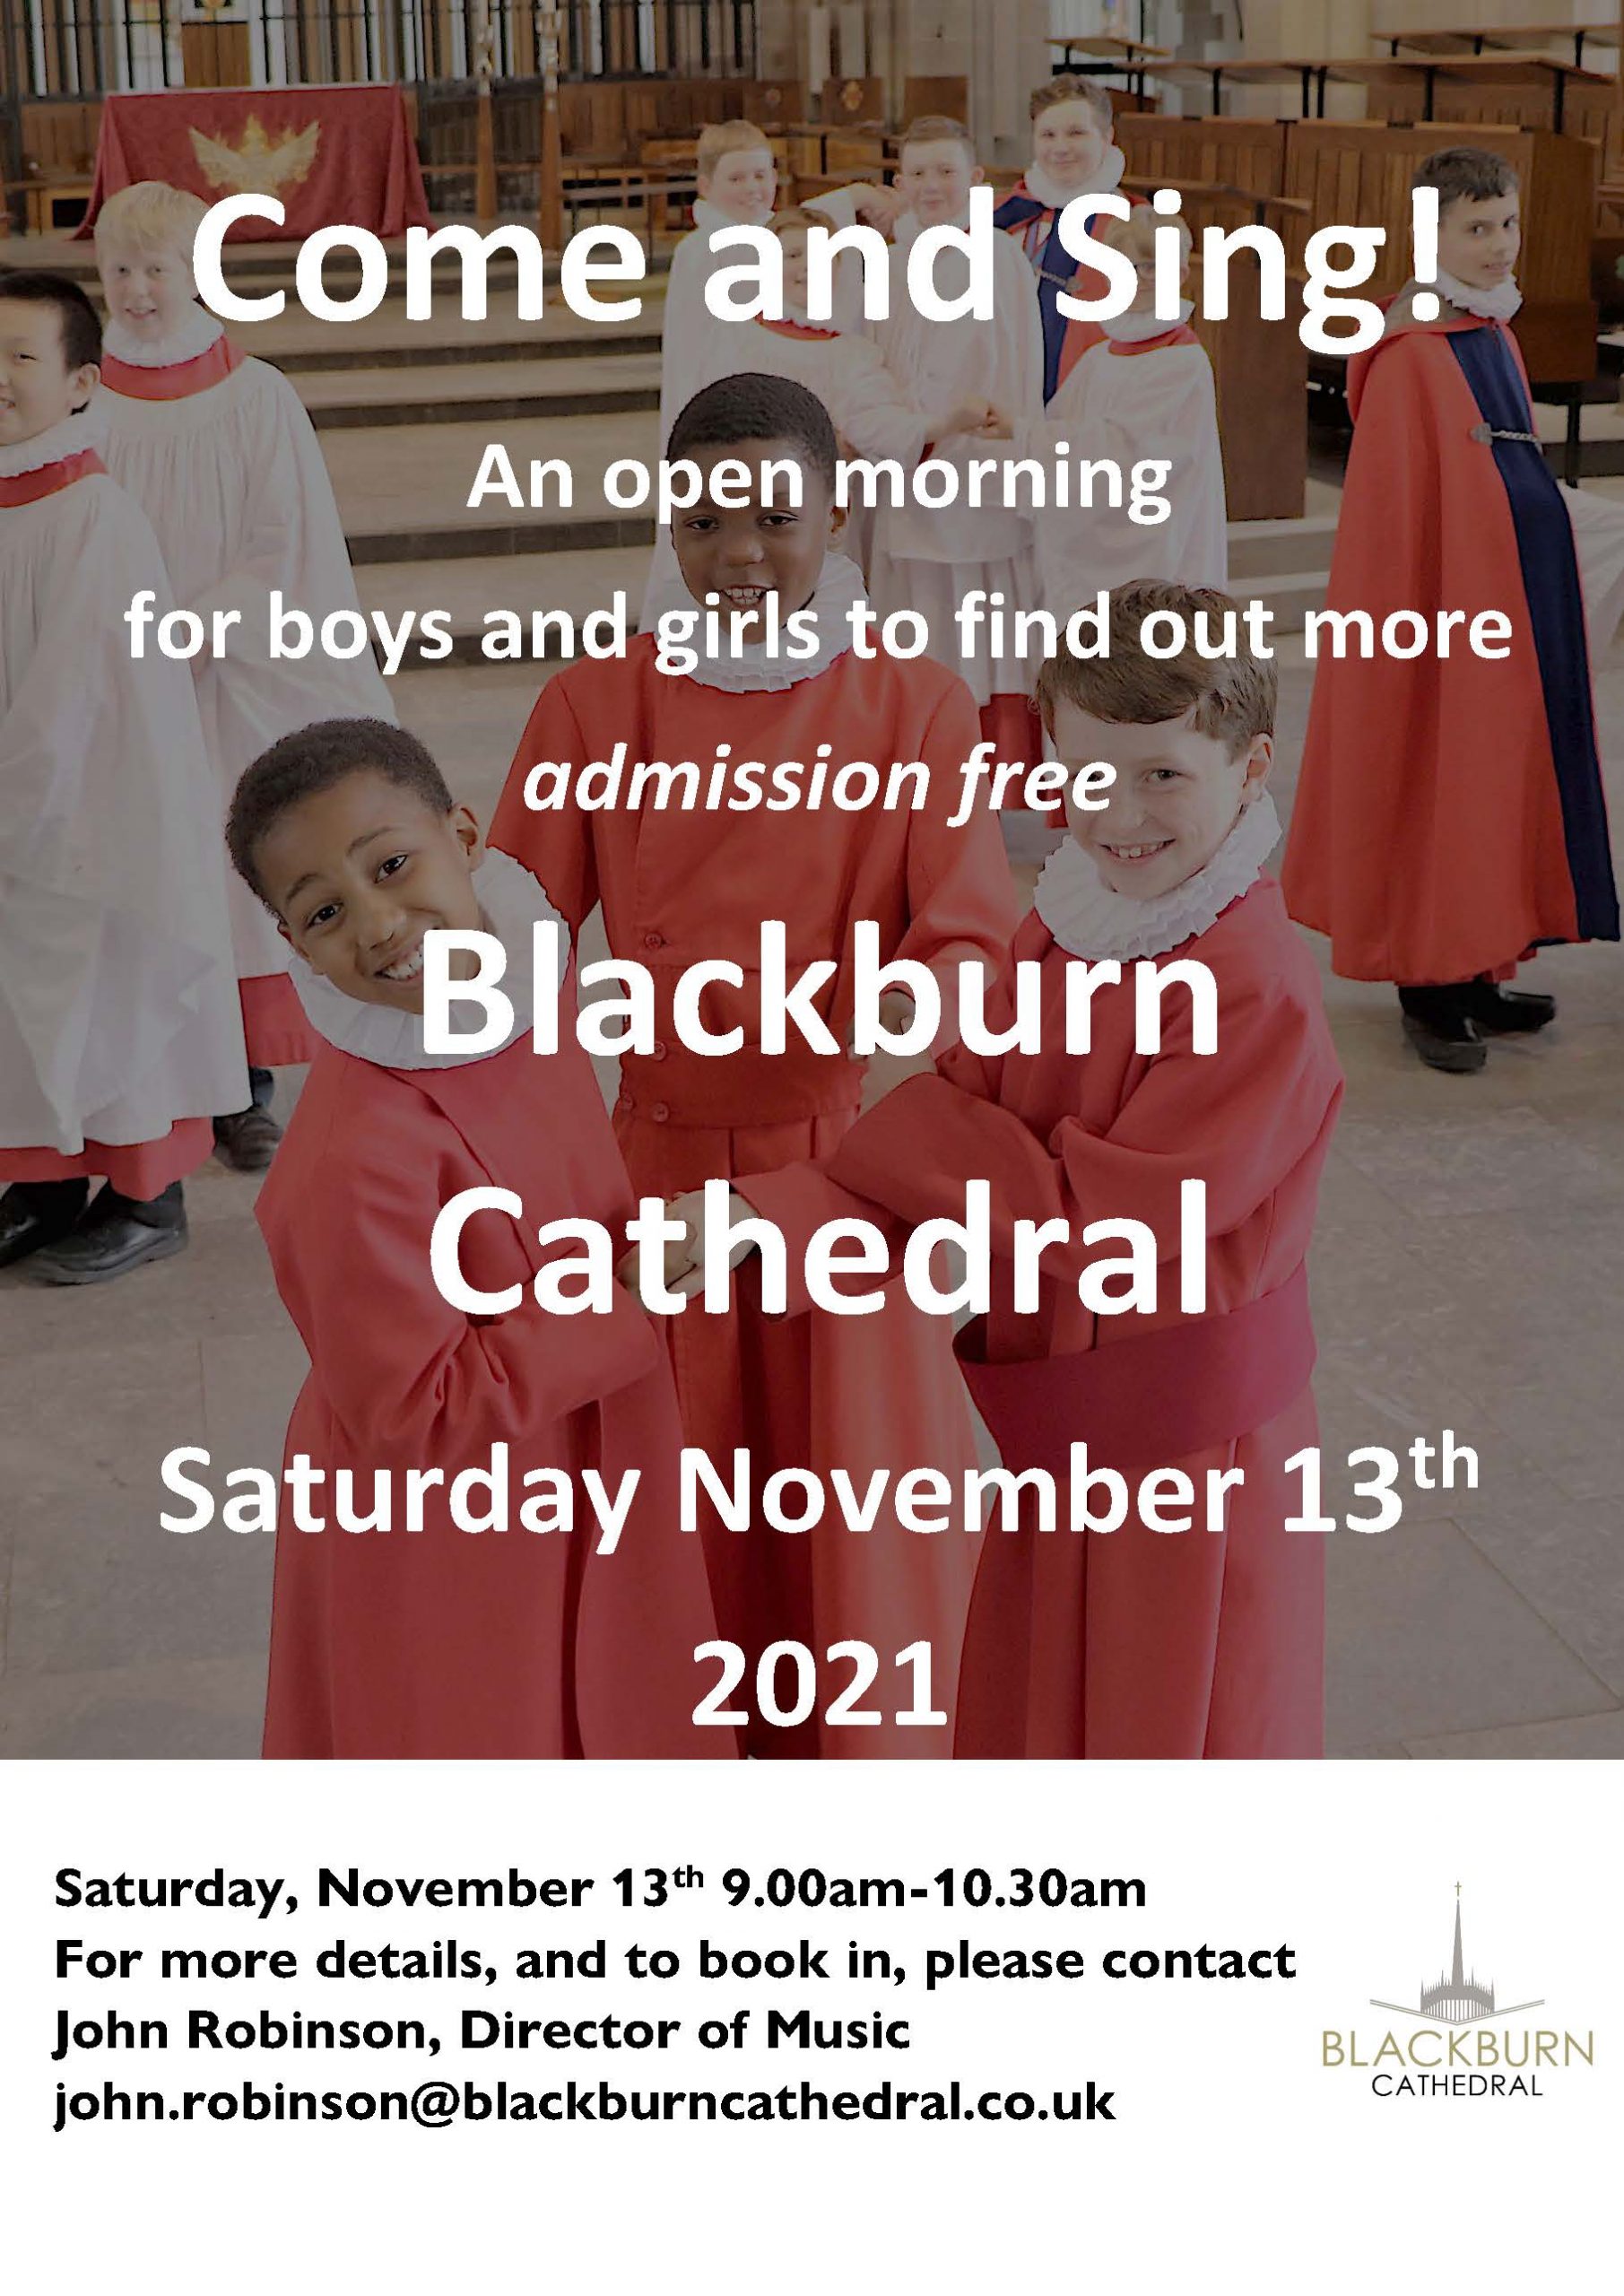 Open morning to come and sing at Blackburn Cathedral